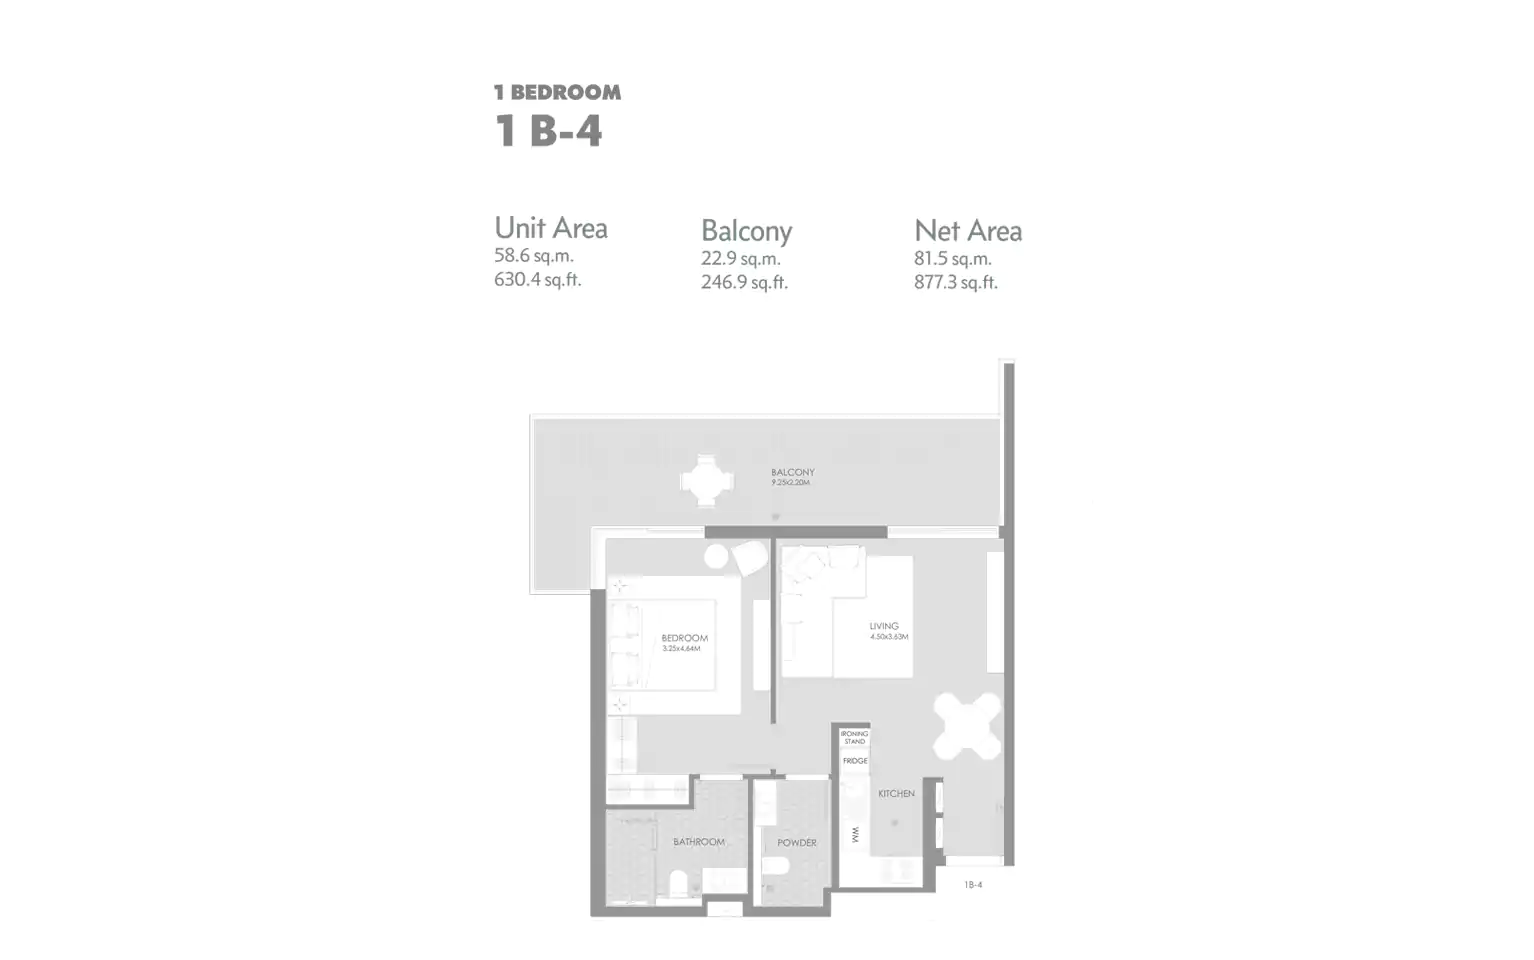 One Bedroom With Balcony 1B-4, Size : 630.4 Sq.ft.